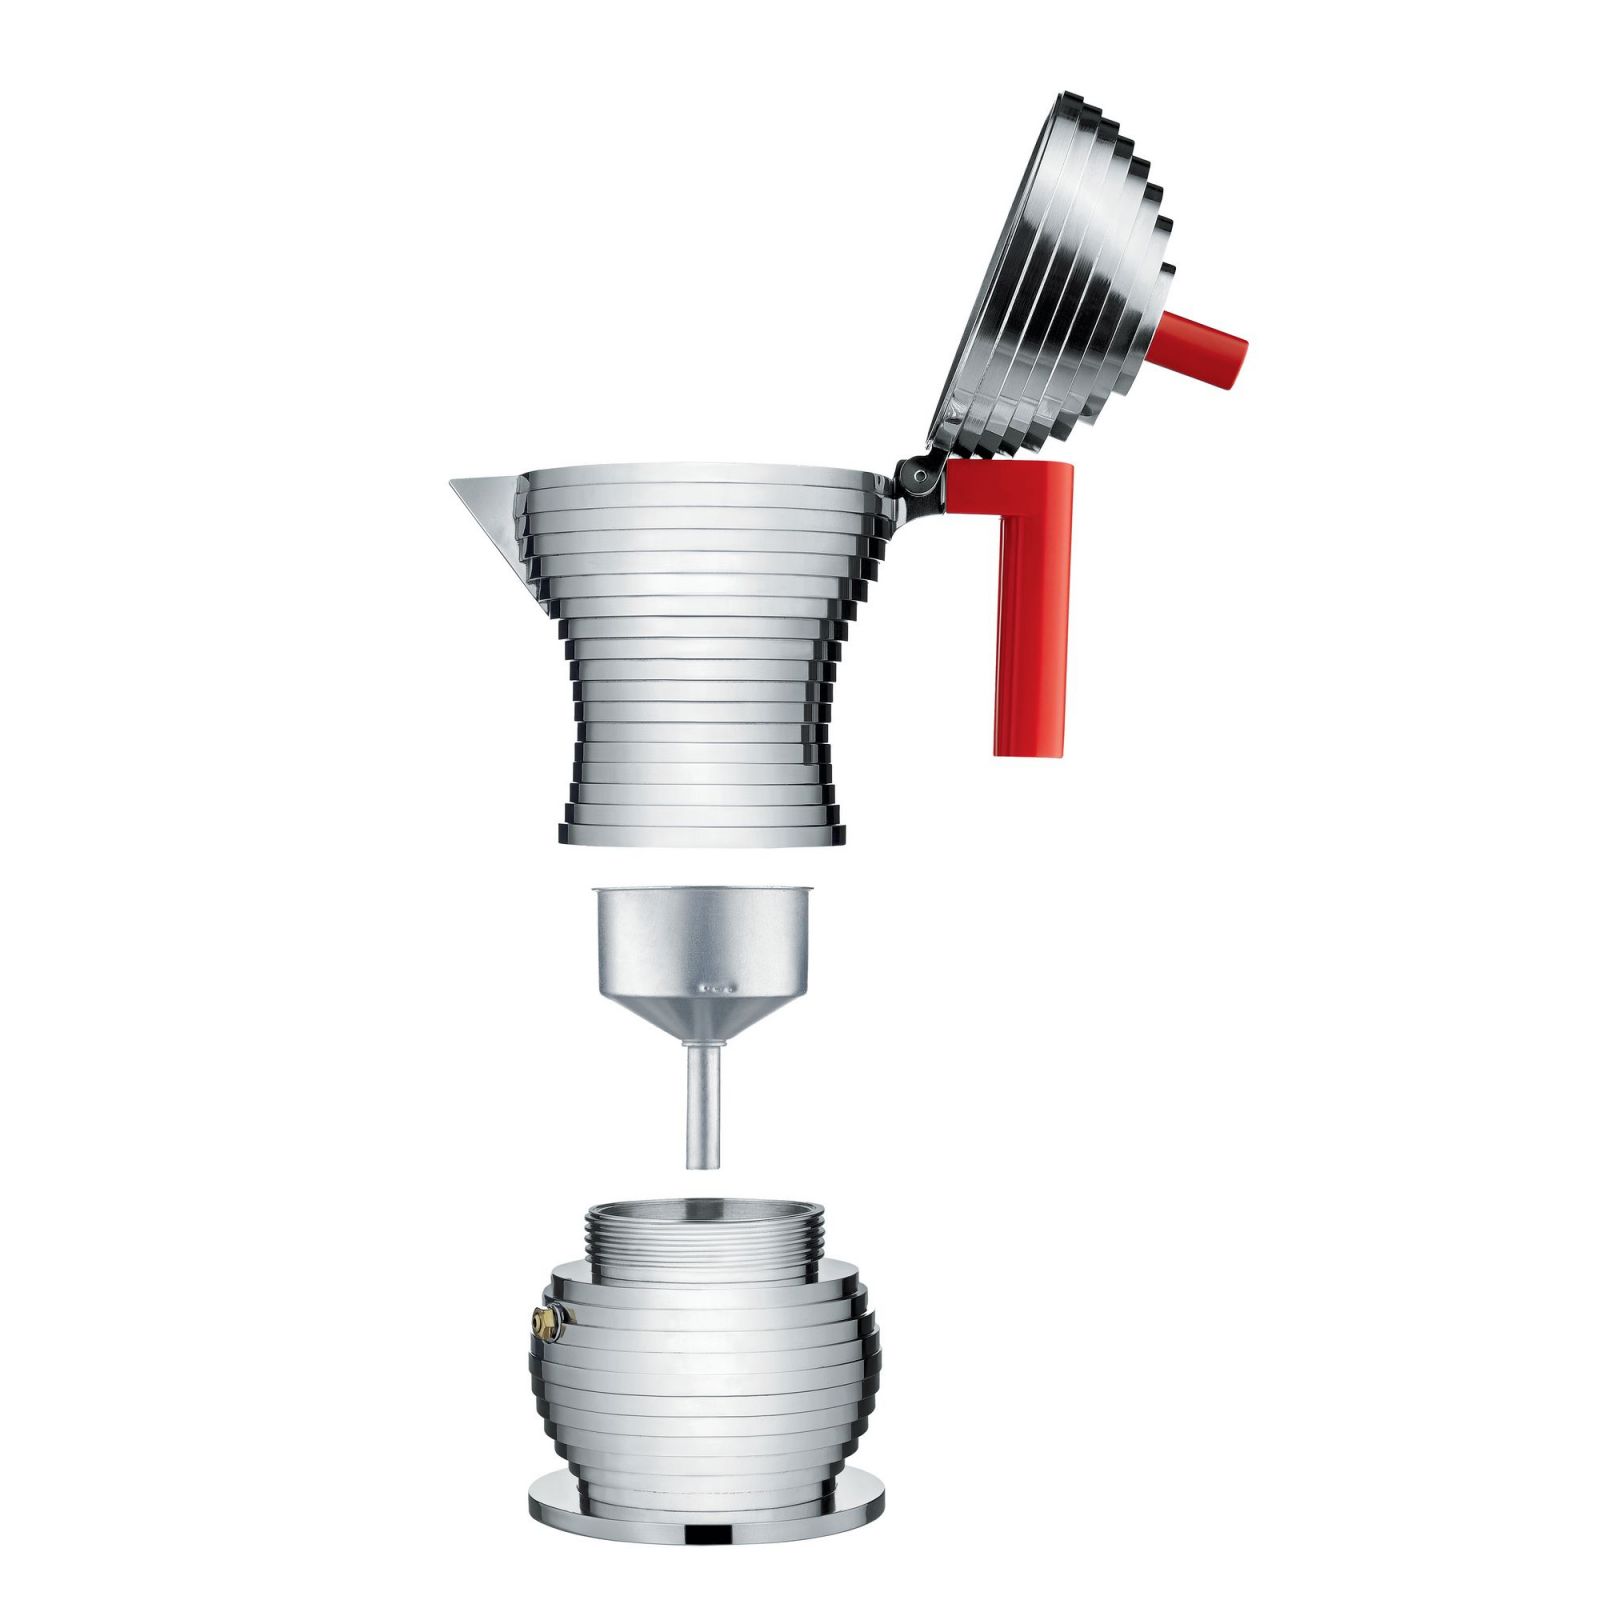 https://www.luxuriousinteriors.com/wp-content/uploads/2019/05/alessi-pulcina-coffee-maker-6-cups-red-parts.jpg